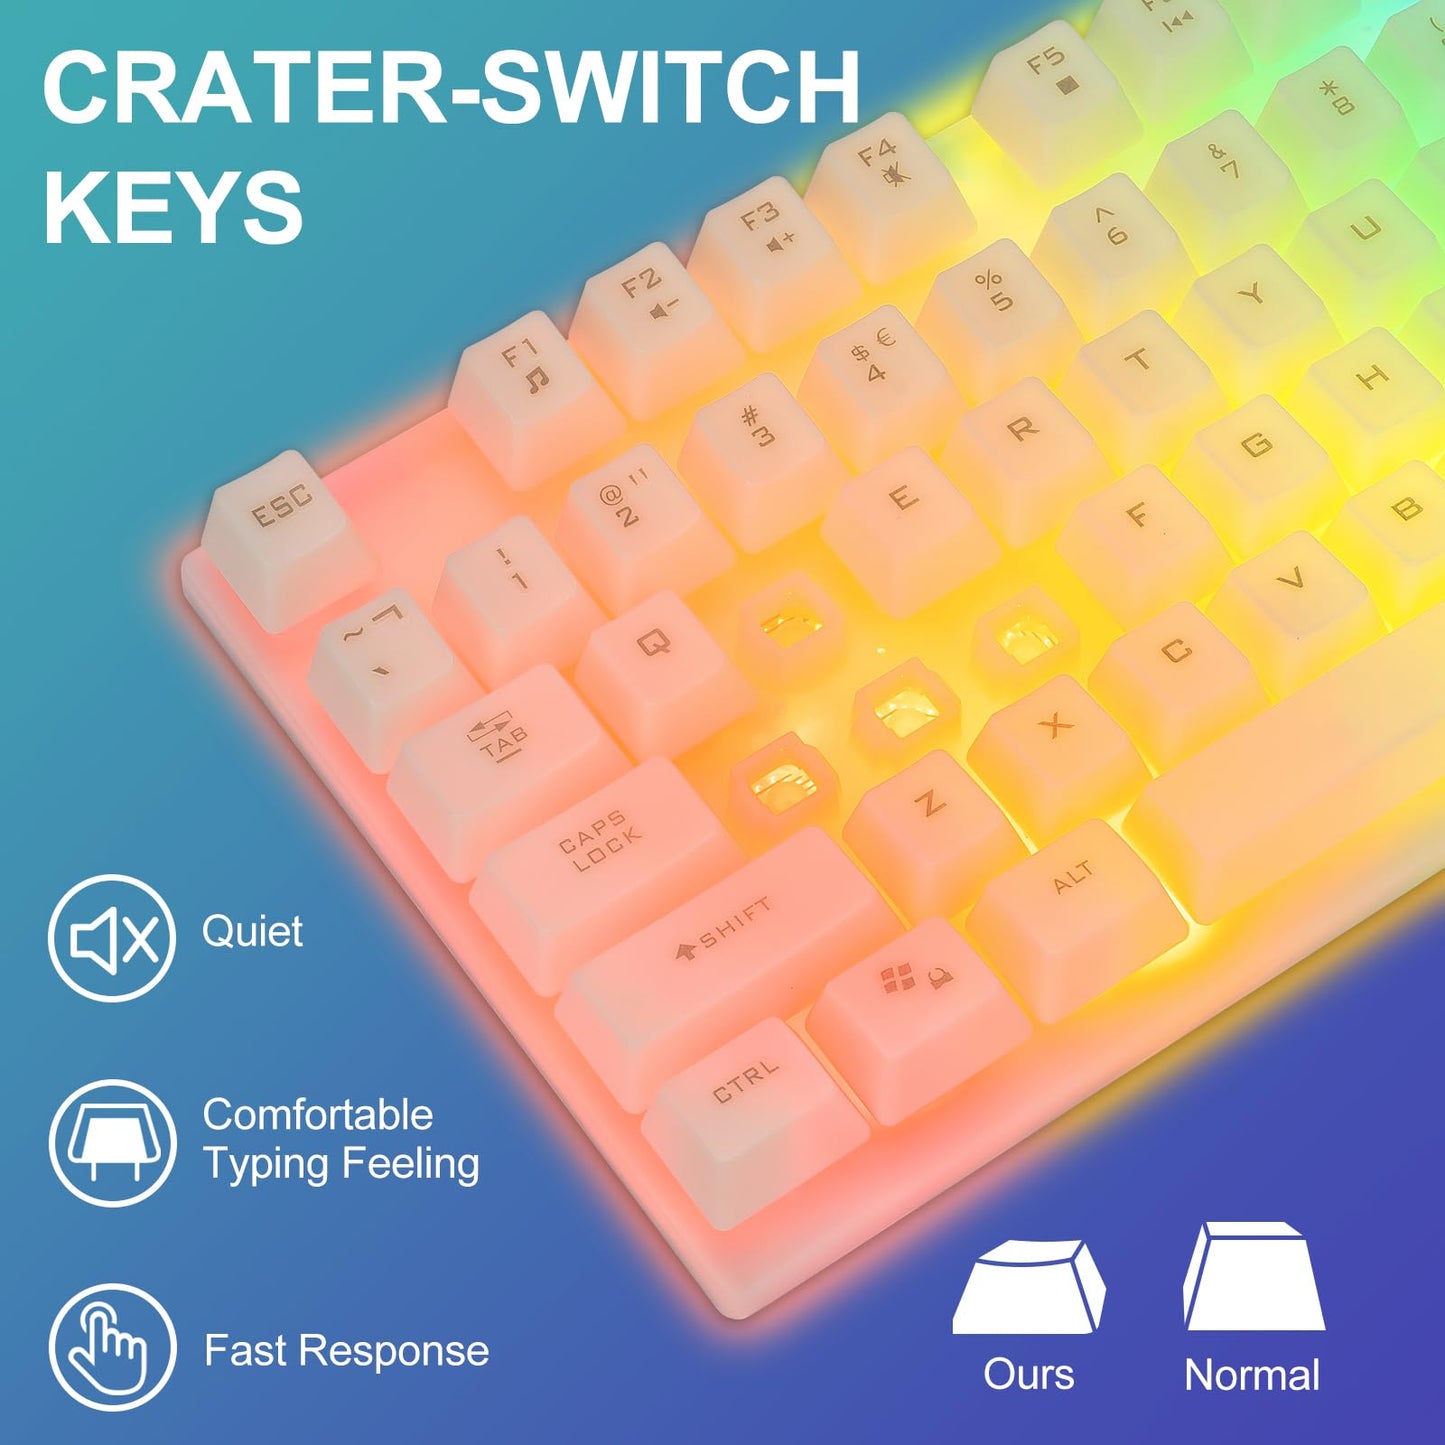 CHONCHOW LED Keyboard and Mouse, 104 Keys Rainbow Backlit Keyboard and 7 Color RGB Mouse, White Gaming Keyboard and Mouse Combo for PC Laptop Xbox PS4 Gamers and Work - amzGamess